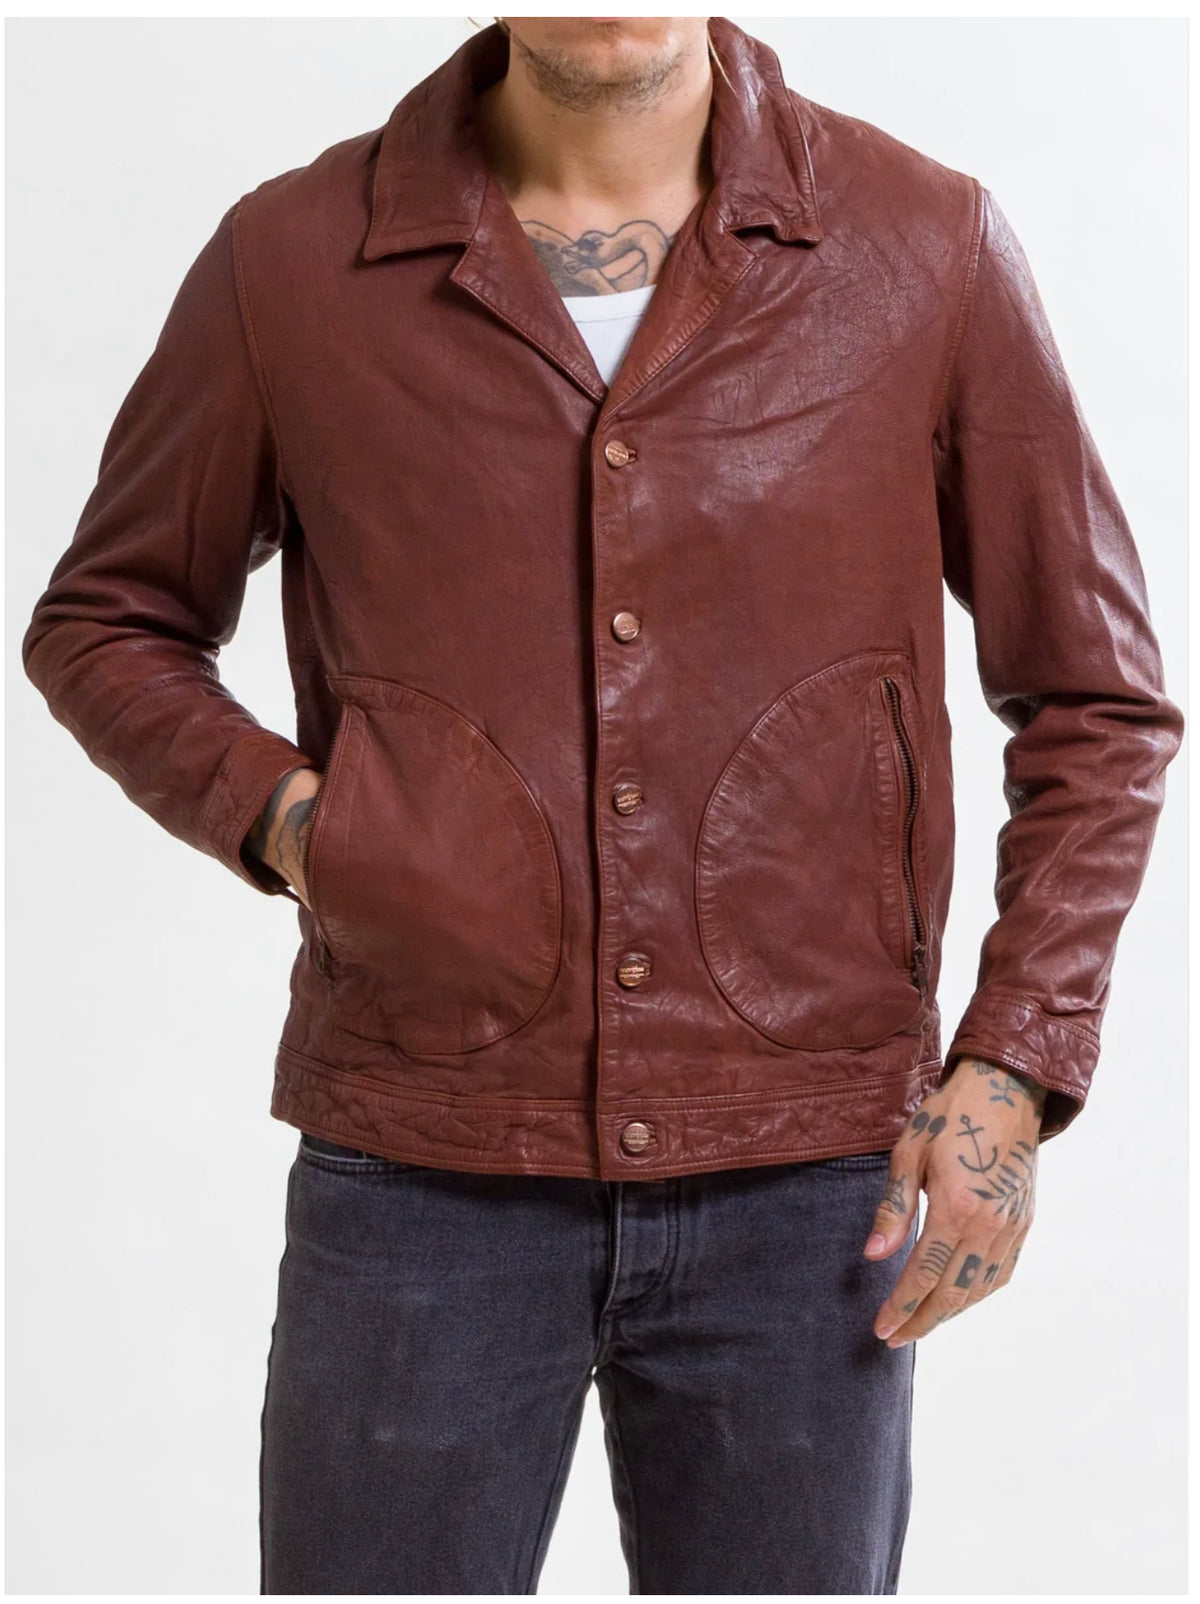 Uncle Bright Murdock Brown Leather Jacket (Excluded from Discount Codes)